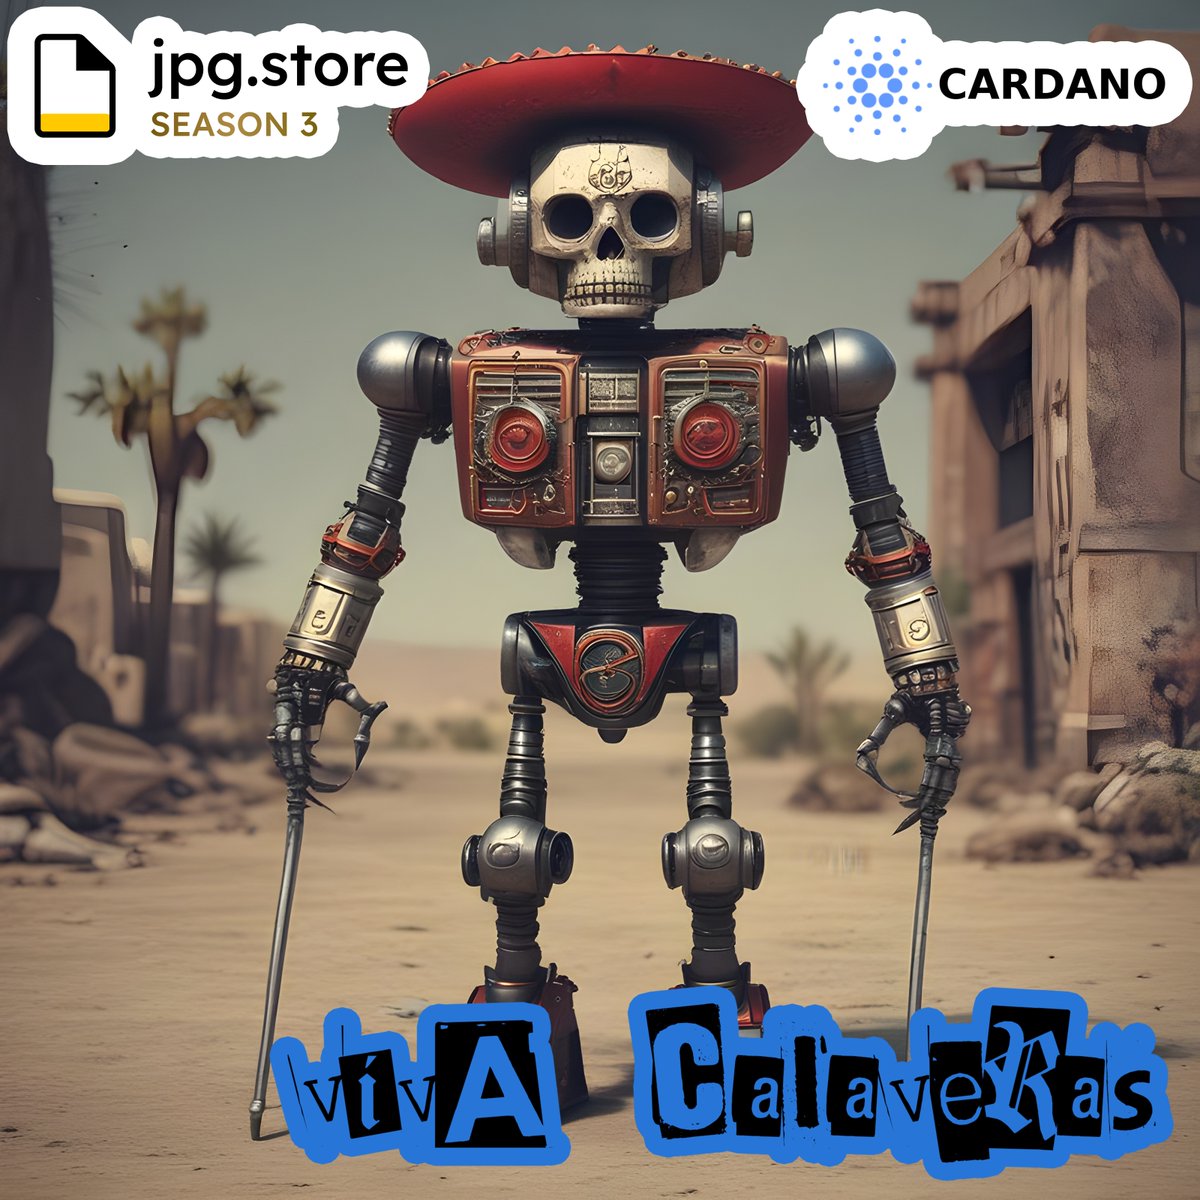 Viva Calaveras on Cardano via jpg.store ! These NFTs can be redeemed for a signed 3D printed K-SCOPES® Trading Card.

Teltrox
jpg.store/listing/226772…

#cardano #ADA #CardanoNFT #NFT #vivacalaveras #calaveras #kscopes #tradingcards #3dprinting #AI #AImusic